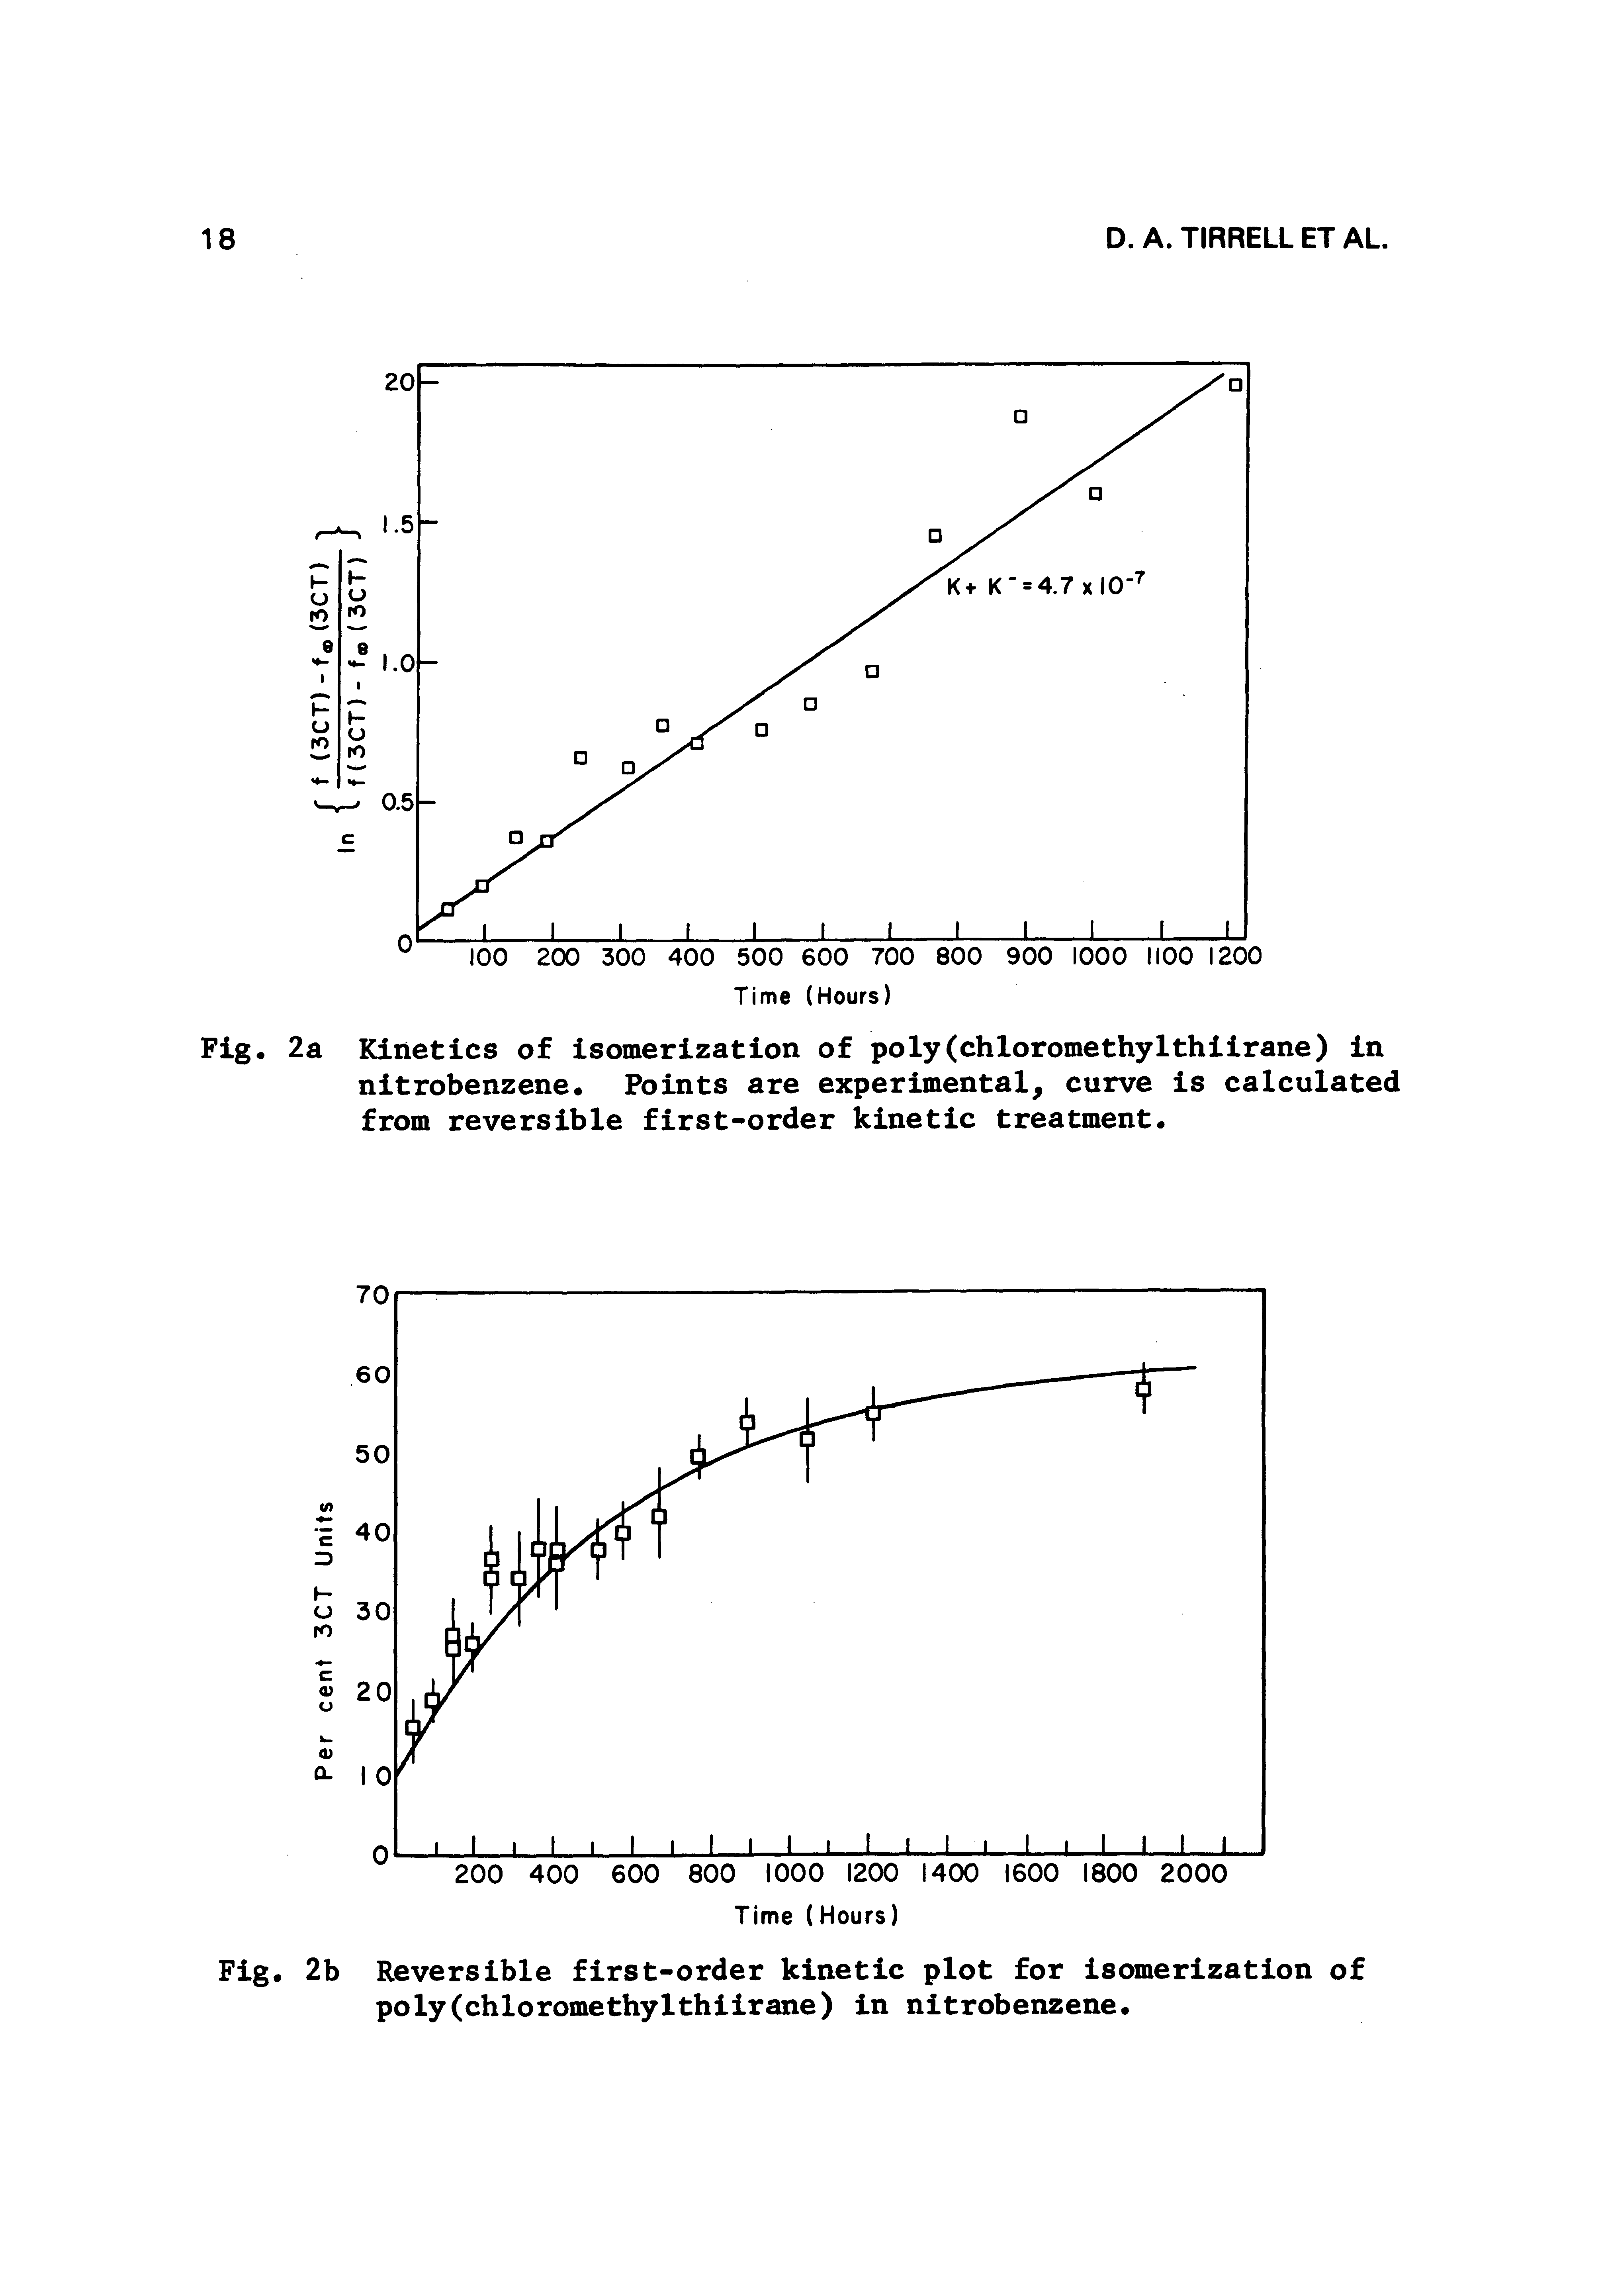 Fig. 2a Kinetics of isomerization of poly(chloromethyIthiirane) in nitrobenzene. Points are experimental curve is calculated from reversible first-order kinetic treatment.